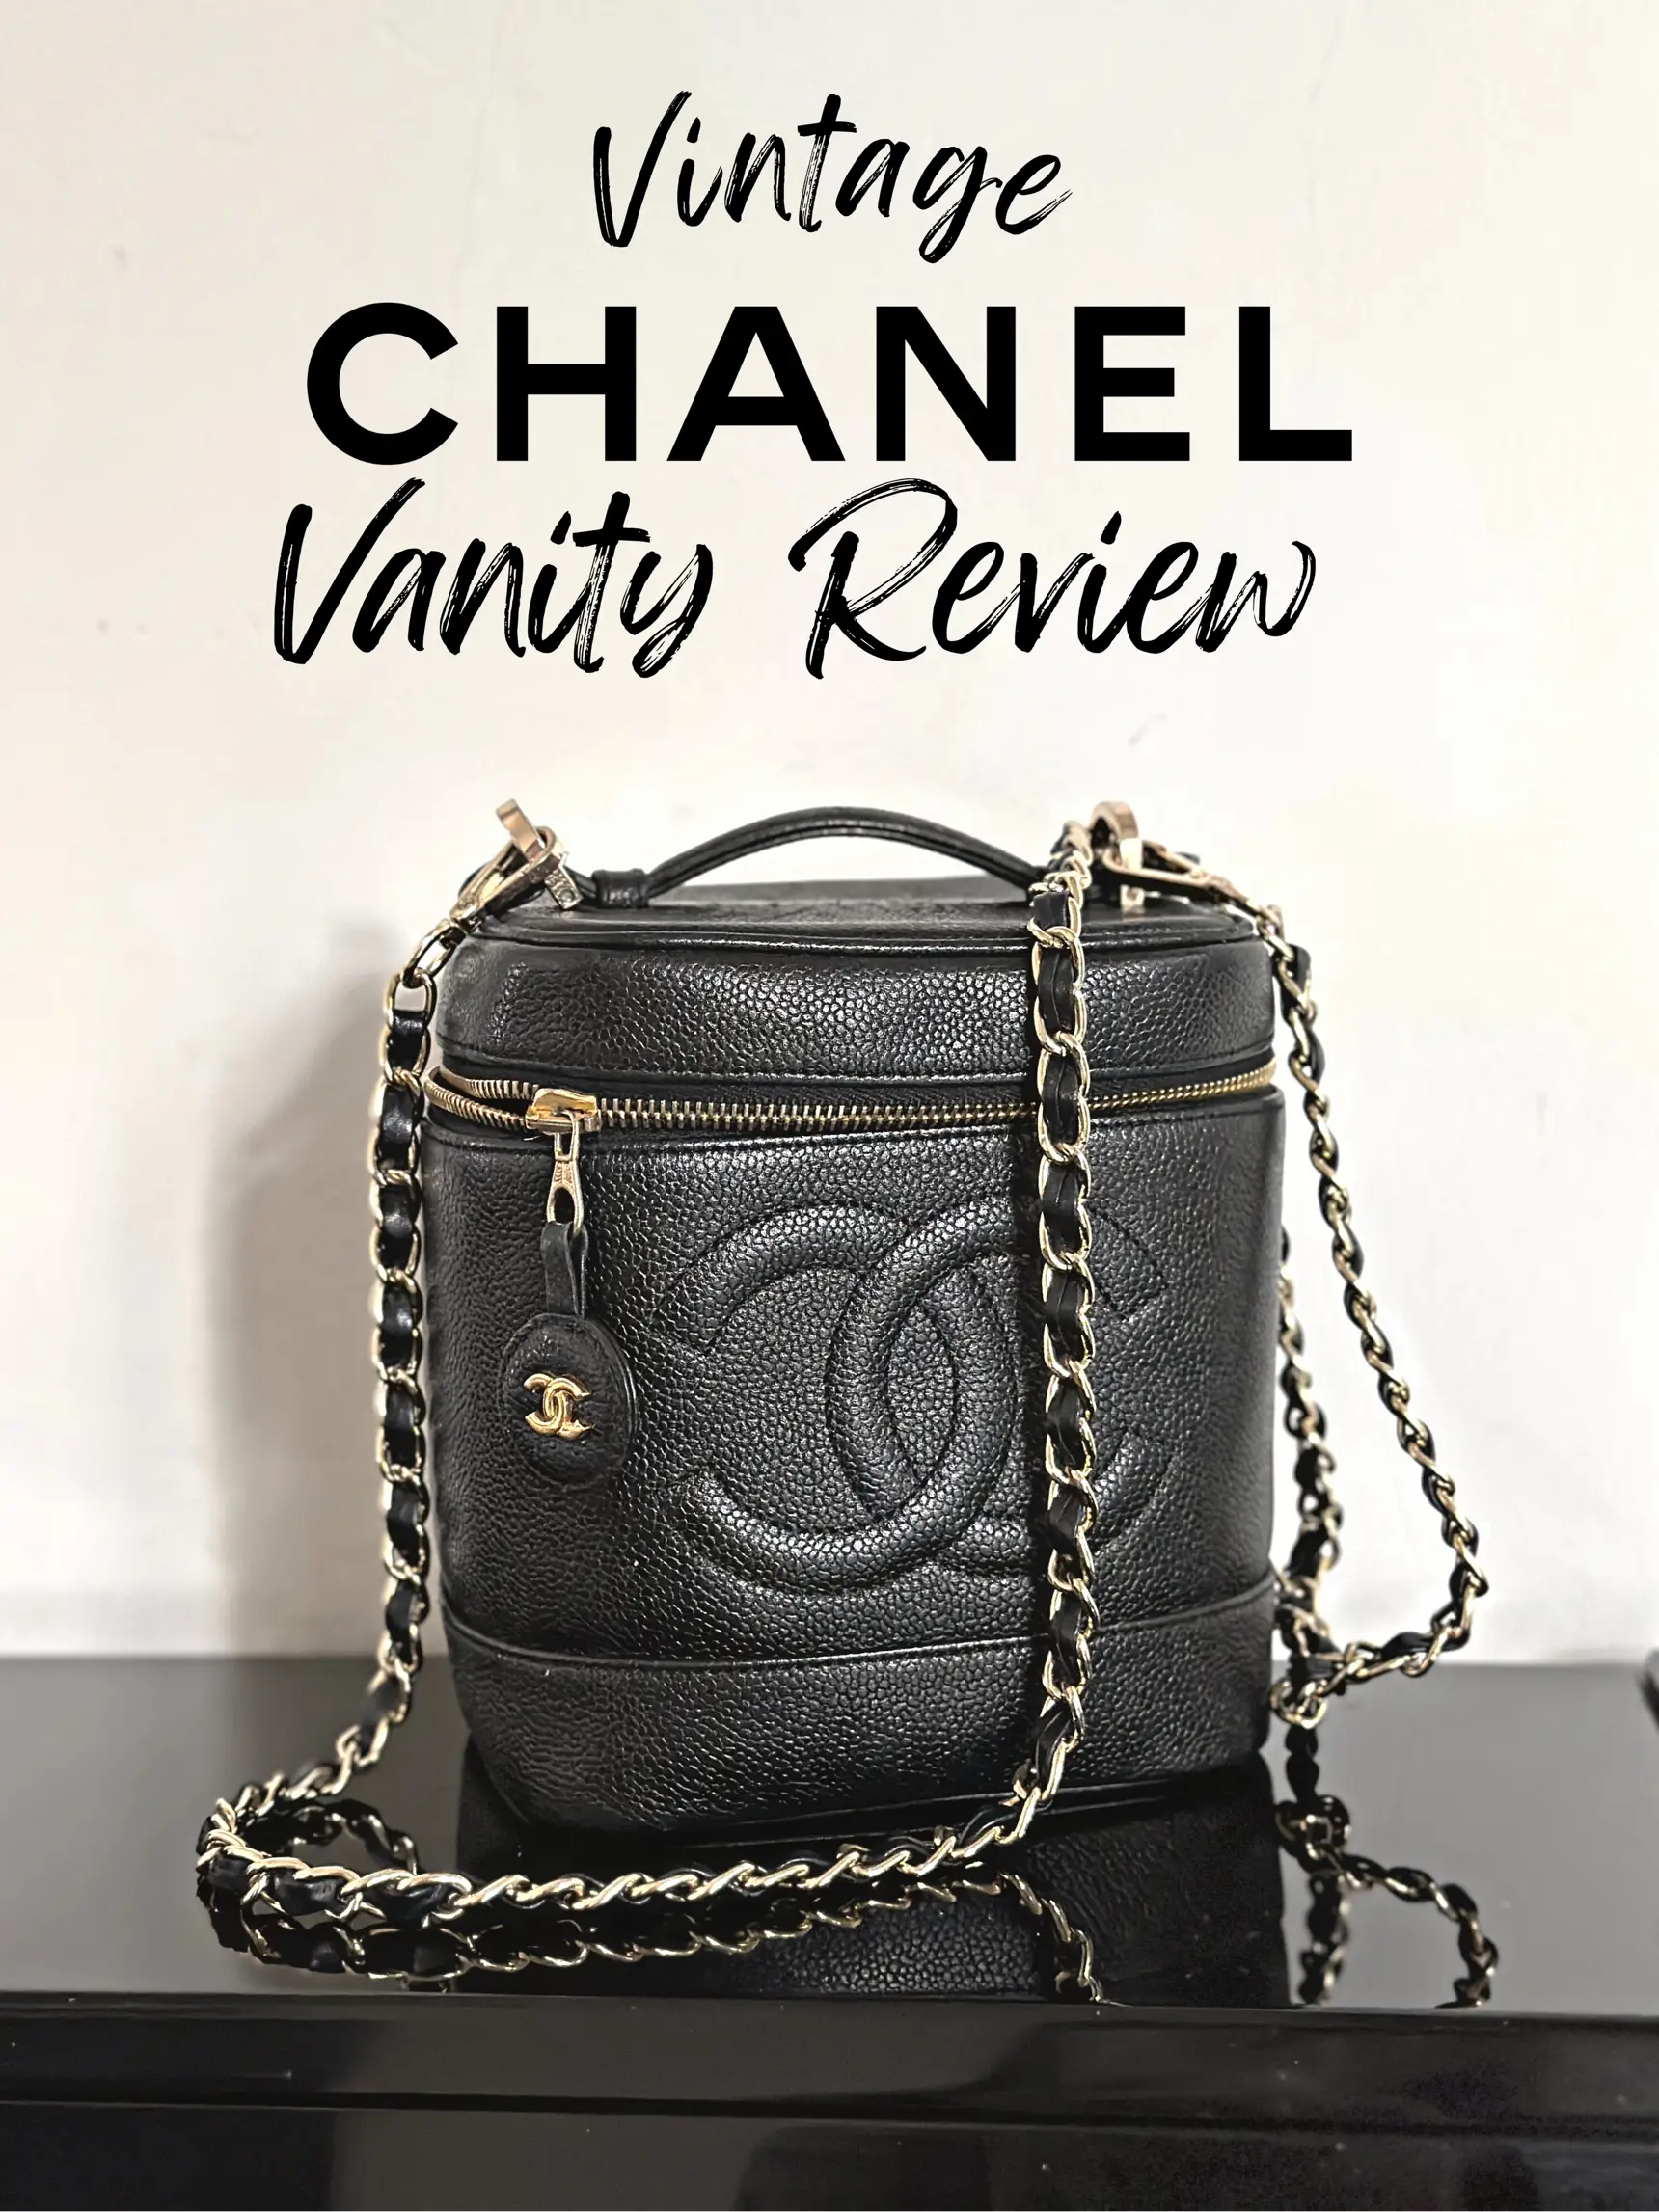 Vintage CHANEL Vanity Bag Review ✨✨✨, Gallery posted by Aynal